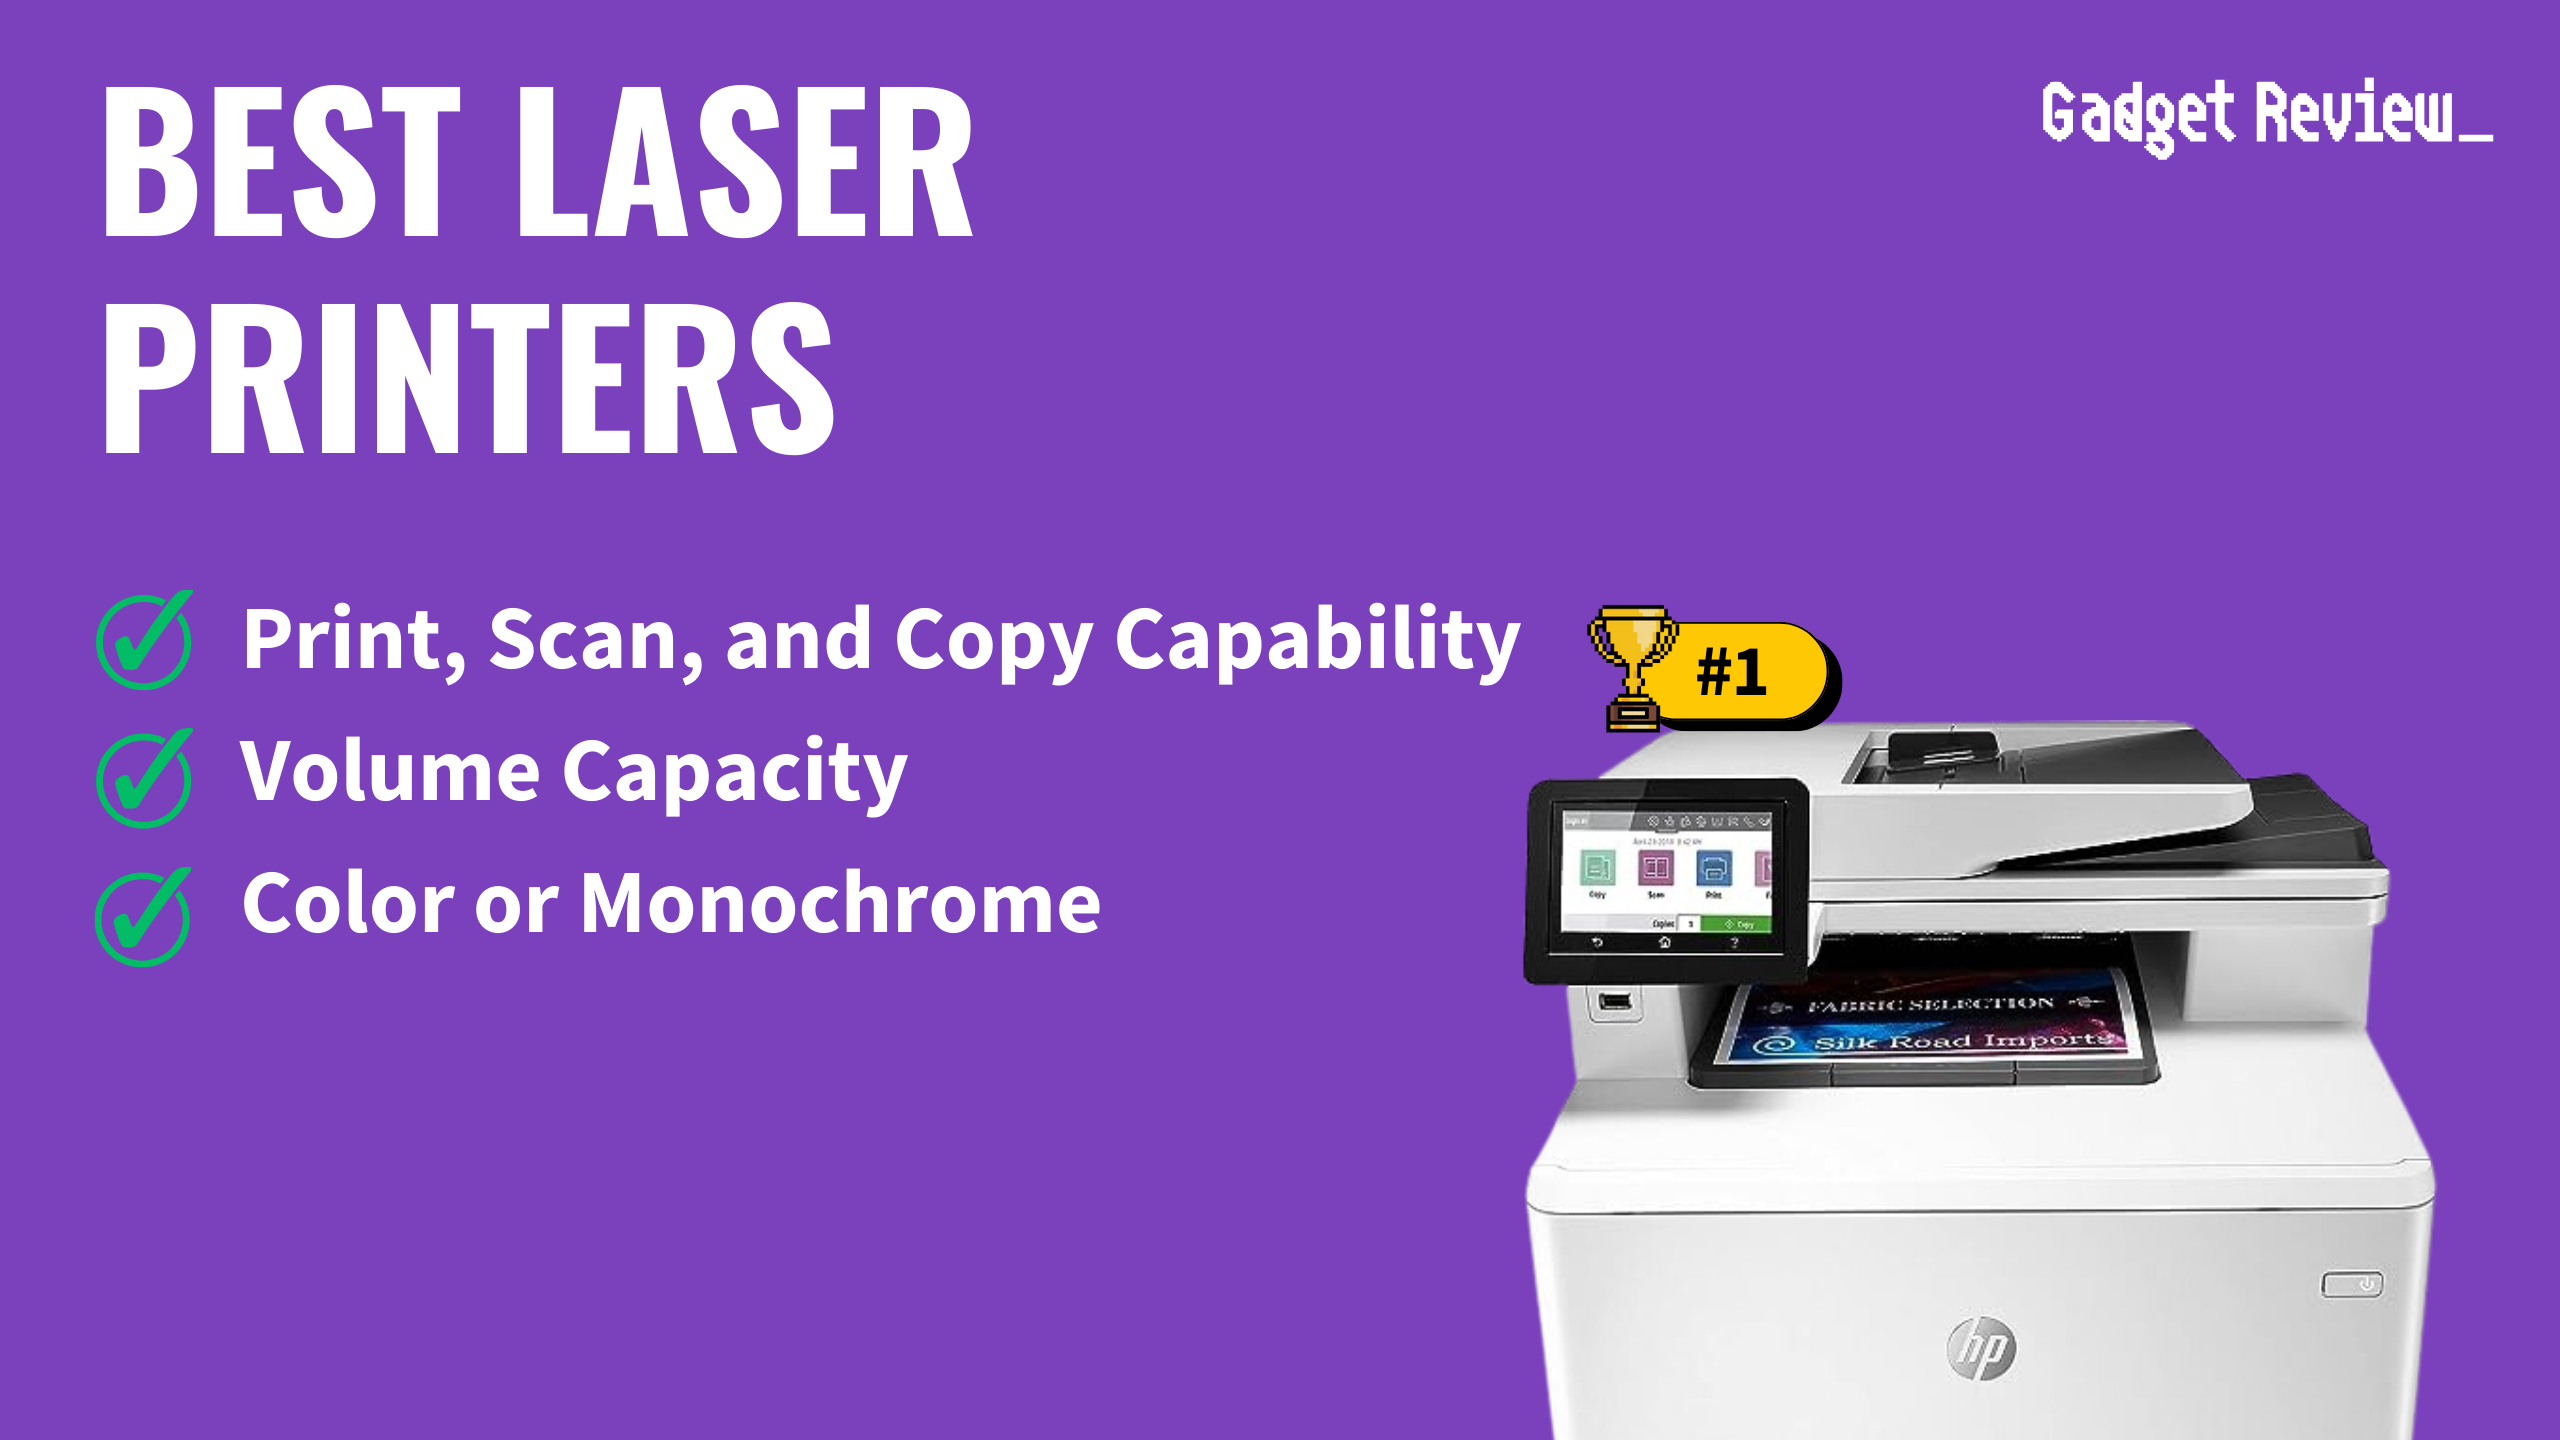 best laser printers featured image that shows the top three best printer models